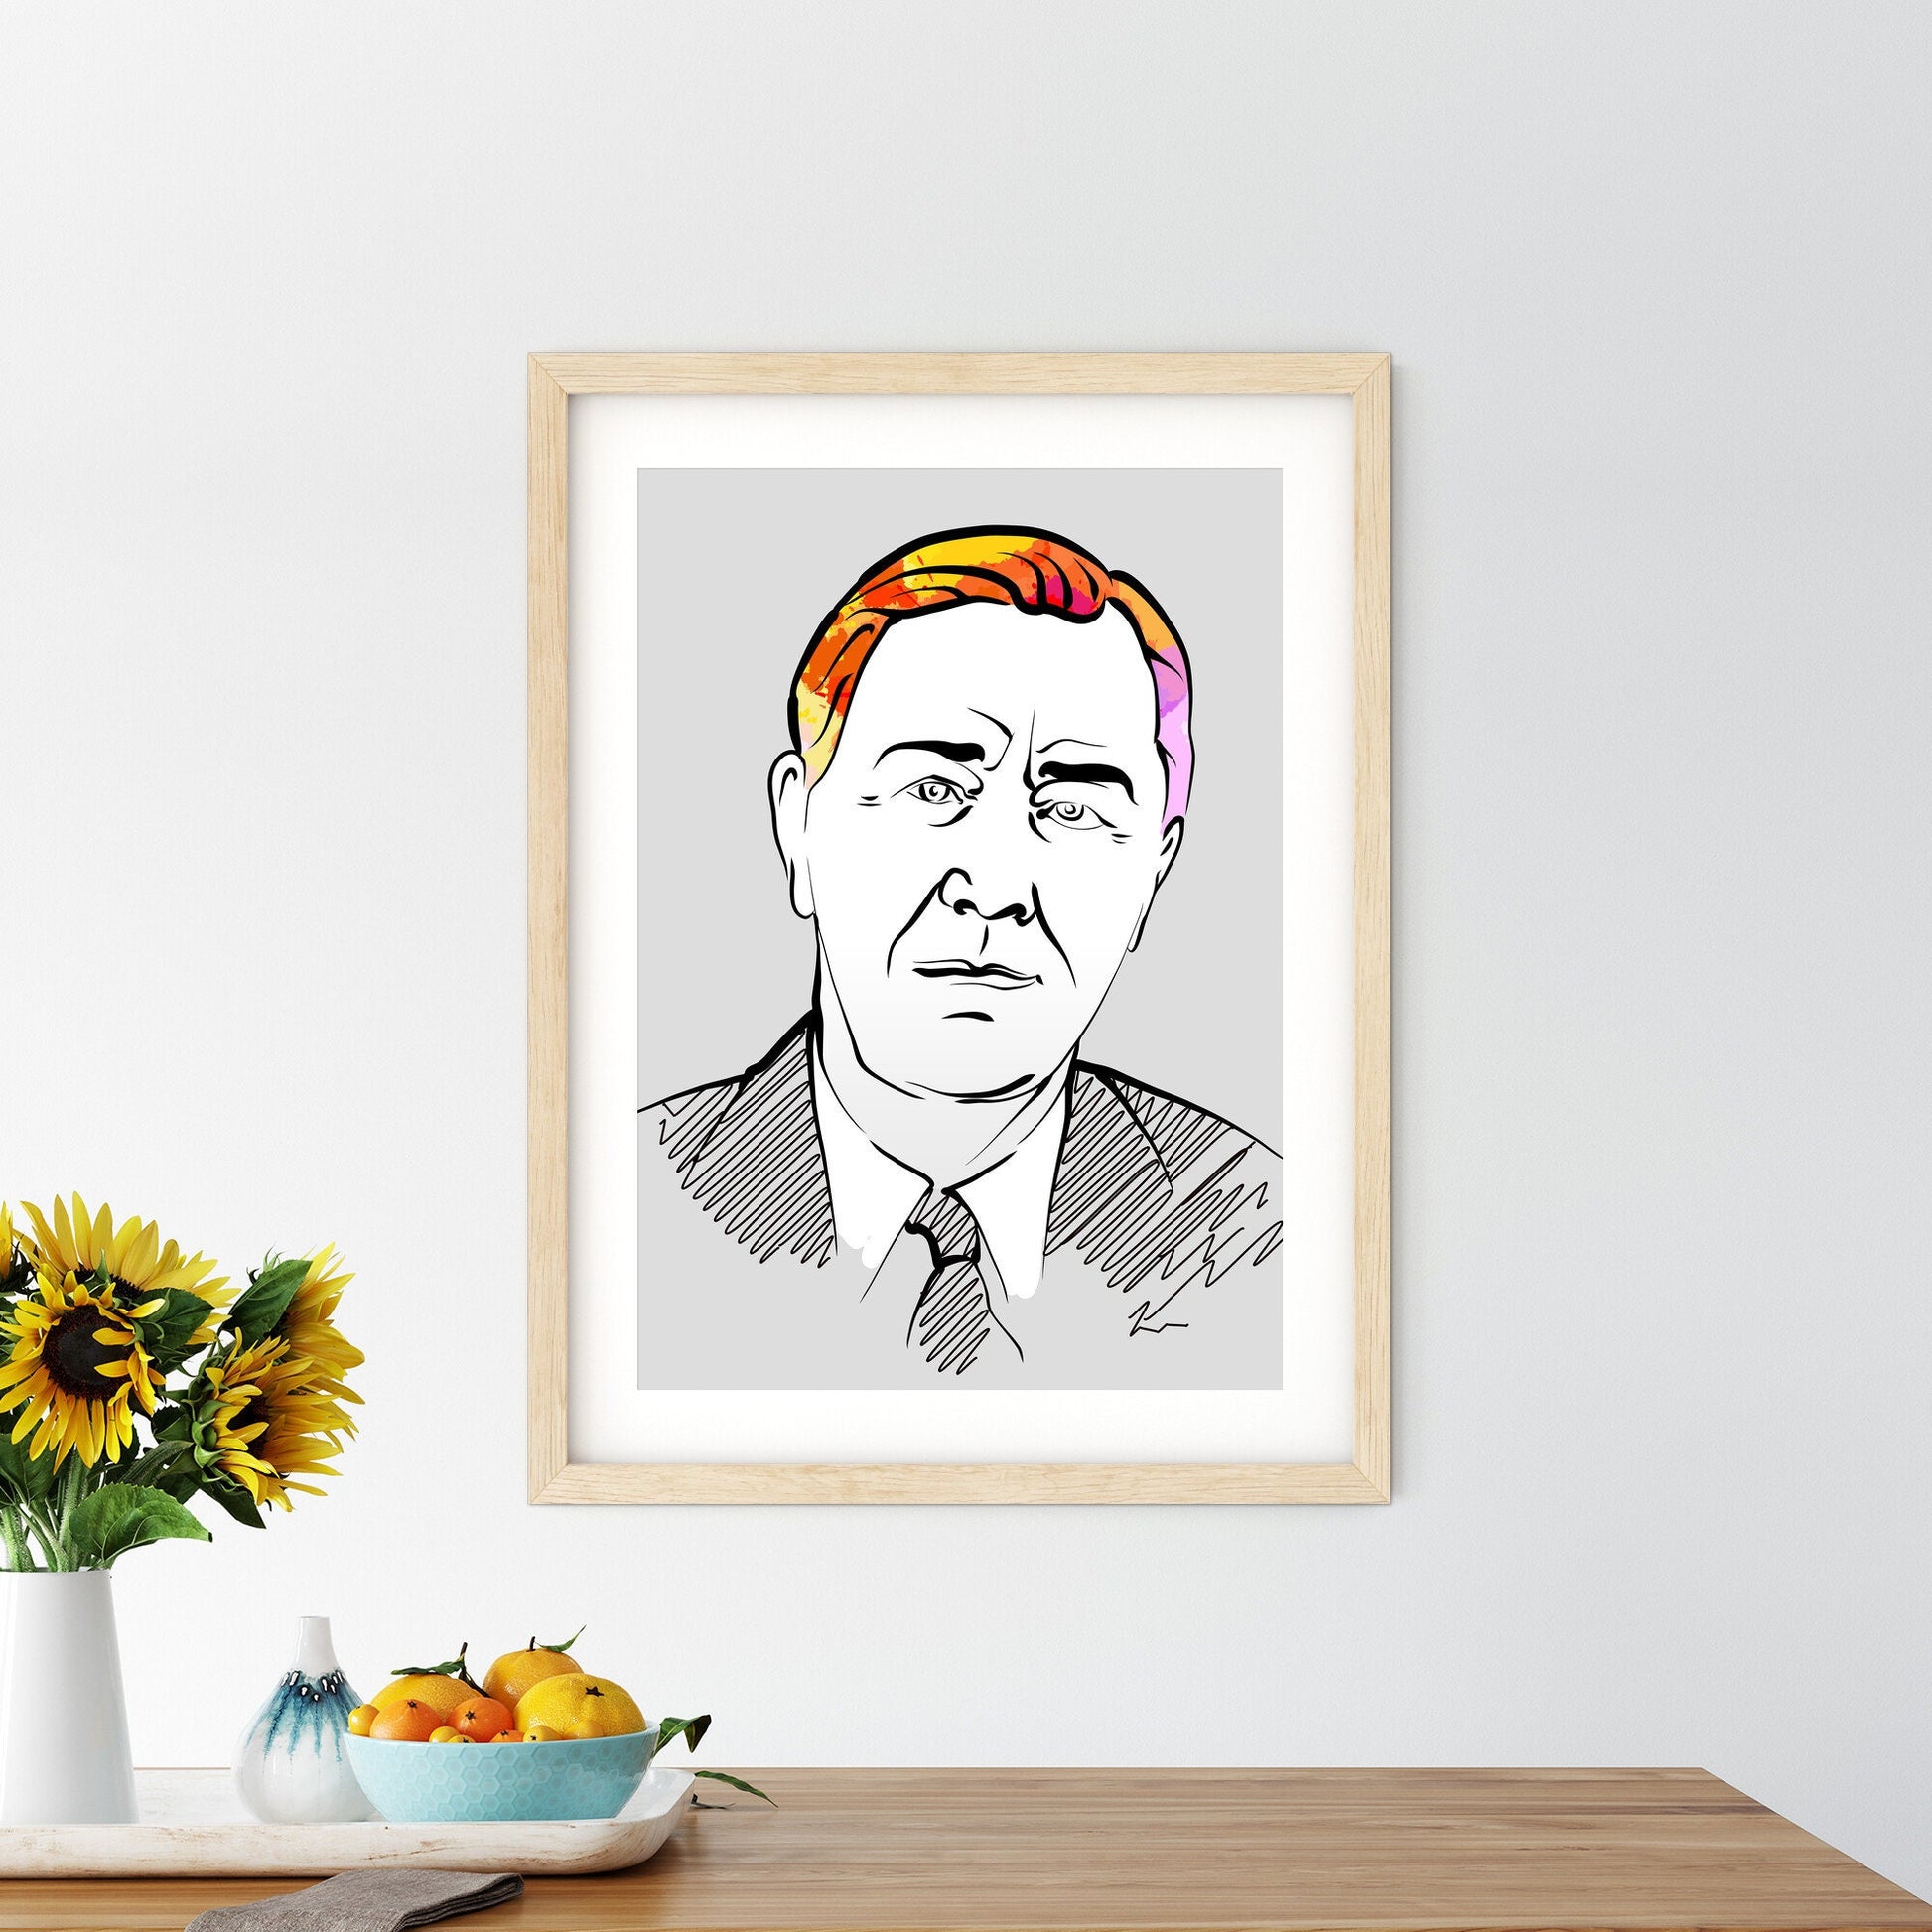 Franklin D. Roosevelt Portrait Poster With Colorful Hair. Perfect print for patriots.